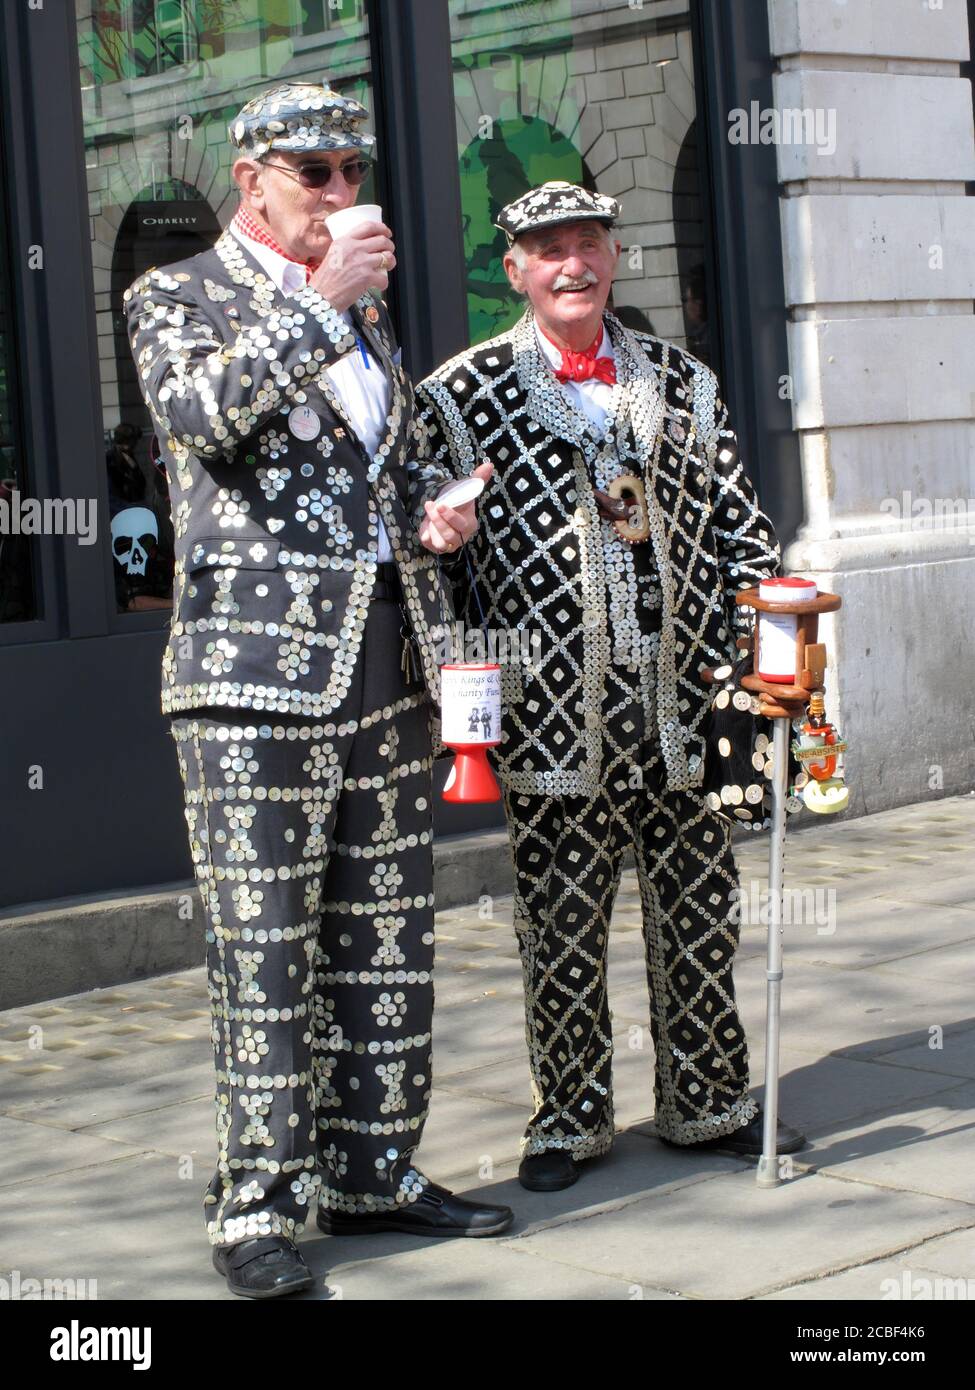 London, United Kingdom, Apr 19, 2009 : Pearly Kings known as Perlies in there sequin clothes collecting for charity in Covent garden and are a popular Stock Photo